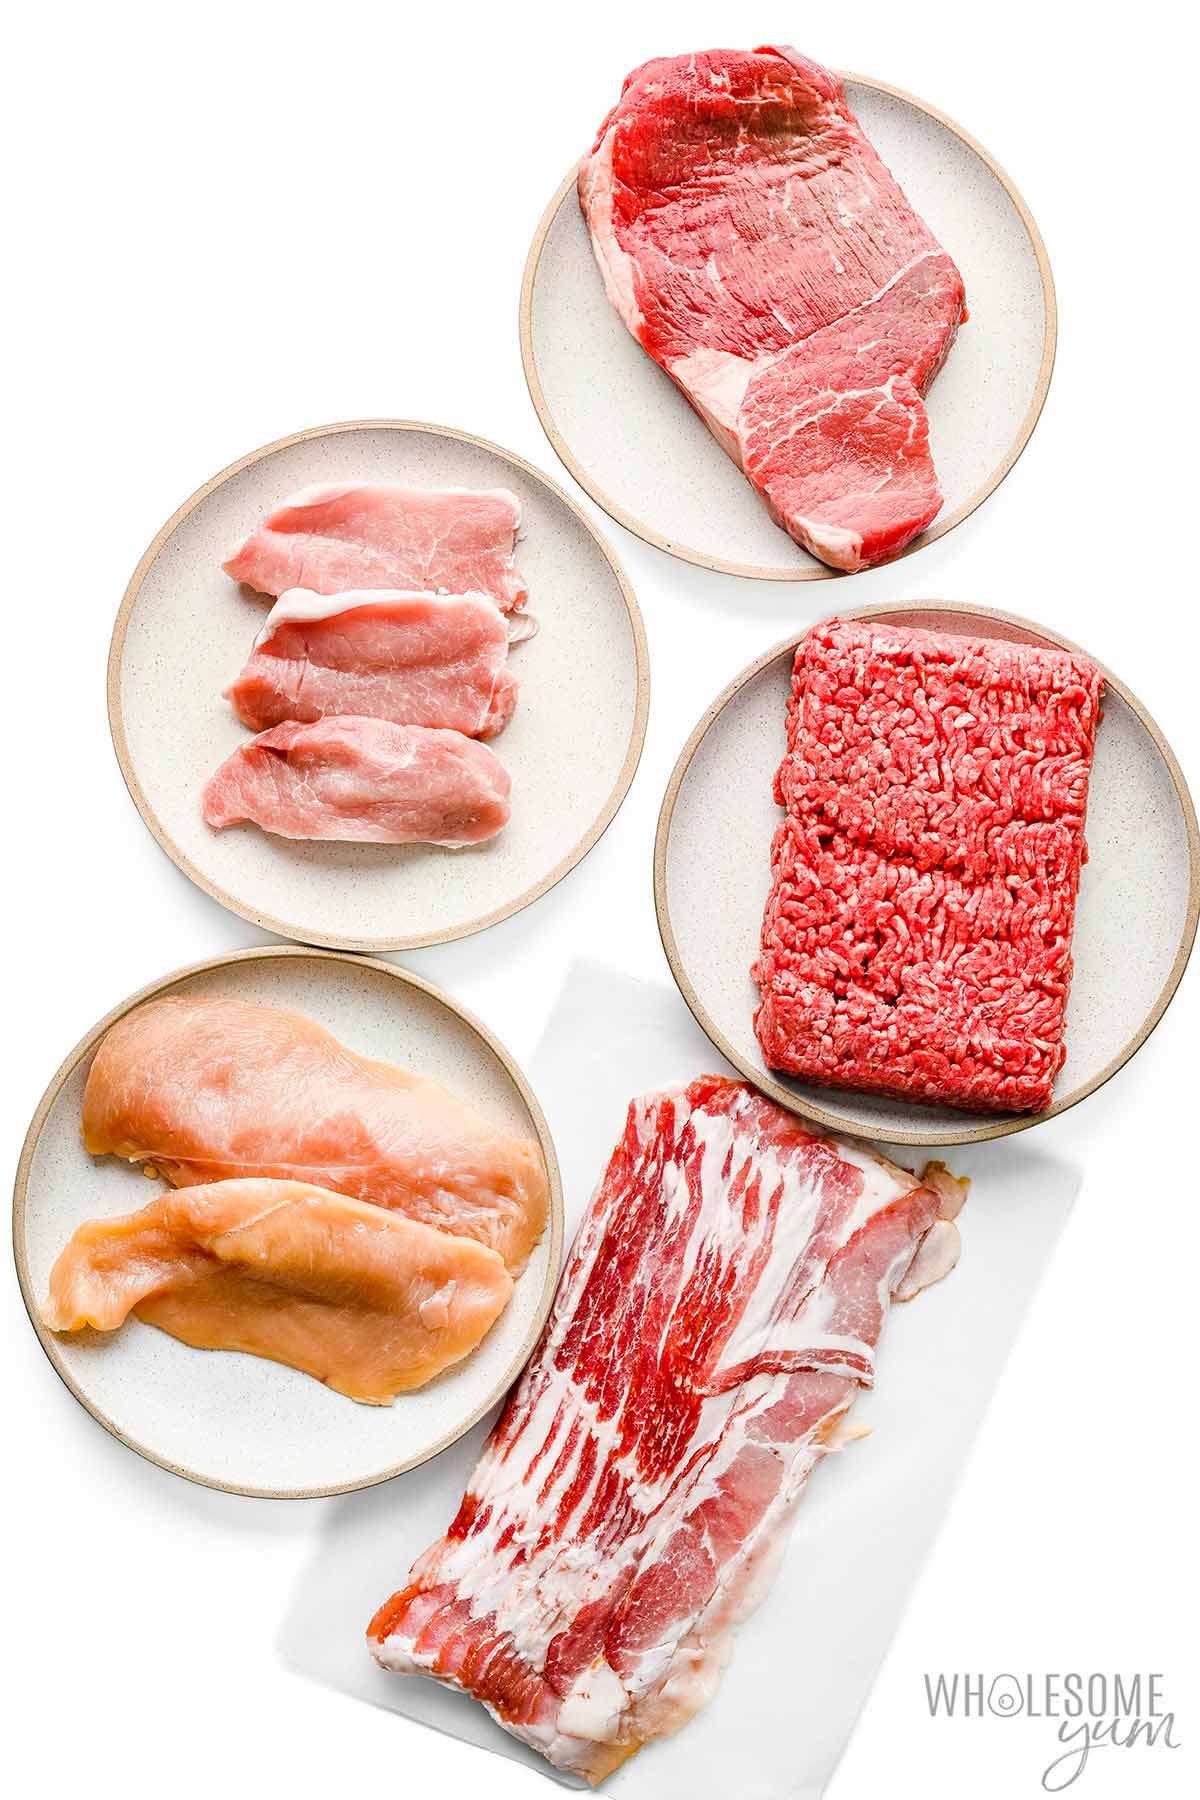 Healthy meats and protein on white background.